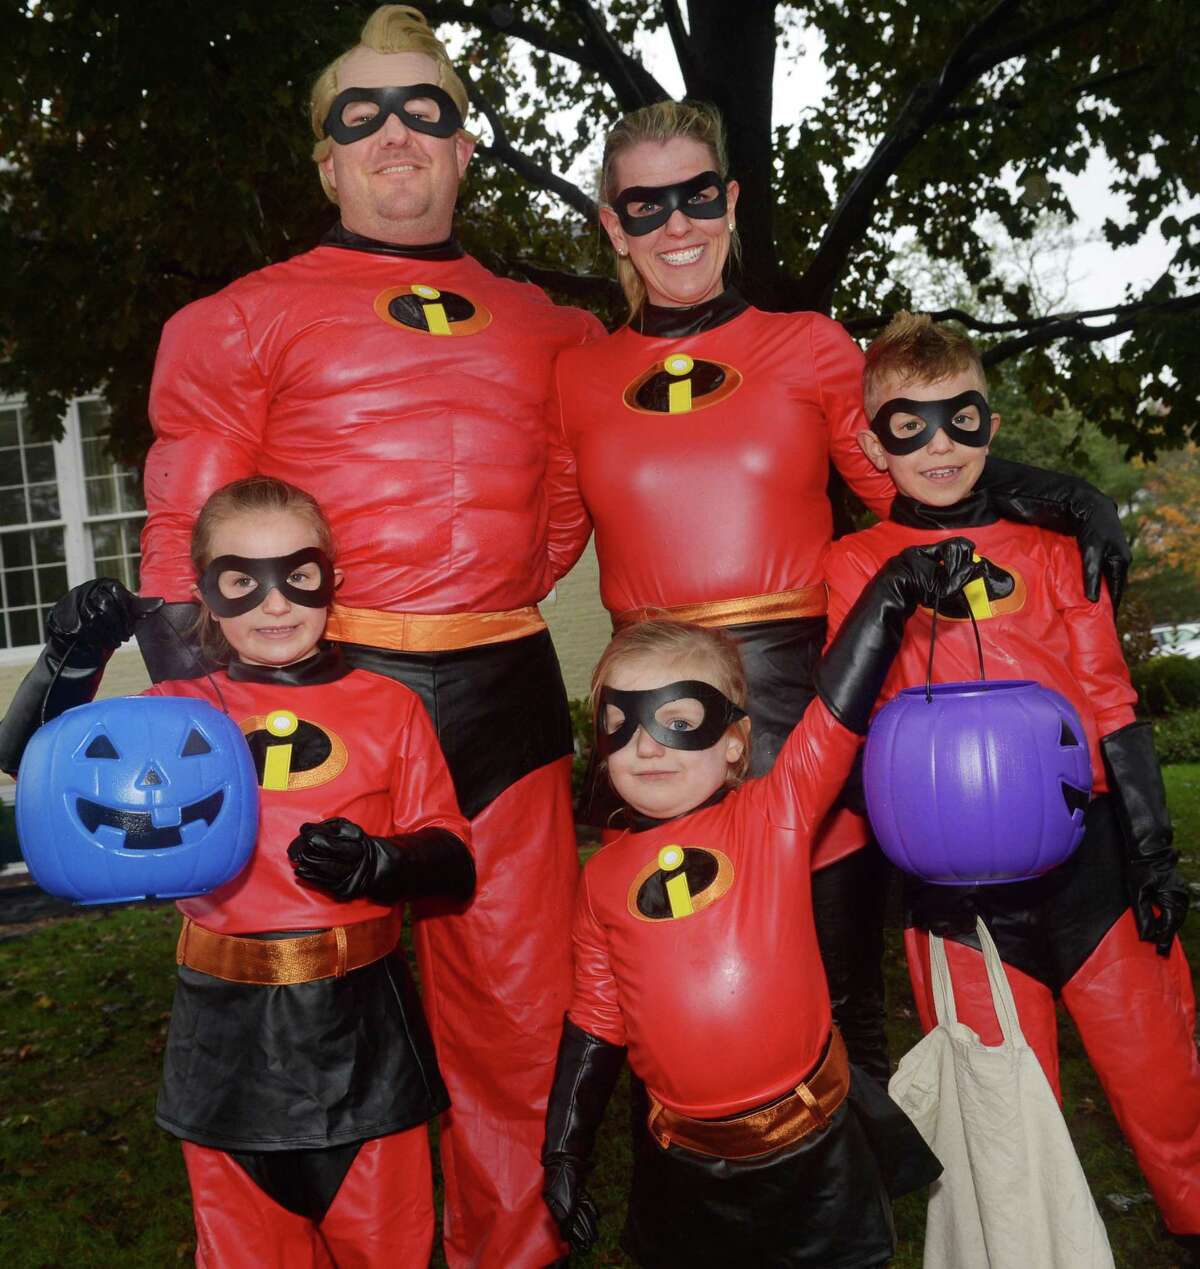 The Smith family of Wilton; dad Mark, mom Alison and their kids, Emily, Bennett, and Harper, dressed as the Incredibles during the Wilton Chamber of Commerce’s annual Pumpkin Parade and Trick-or-Treat Saturday, October 27, 2018, in Wilton Conn.